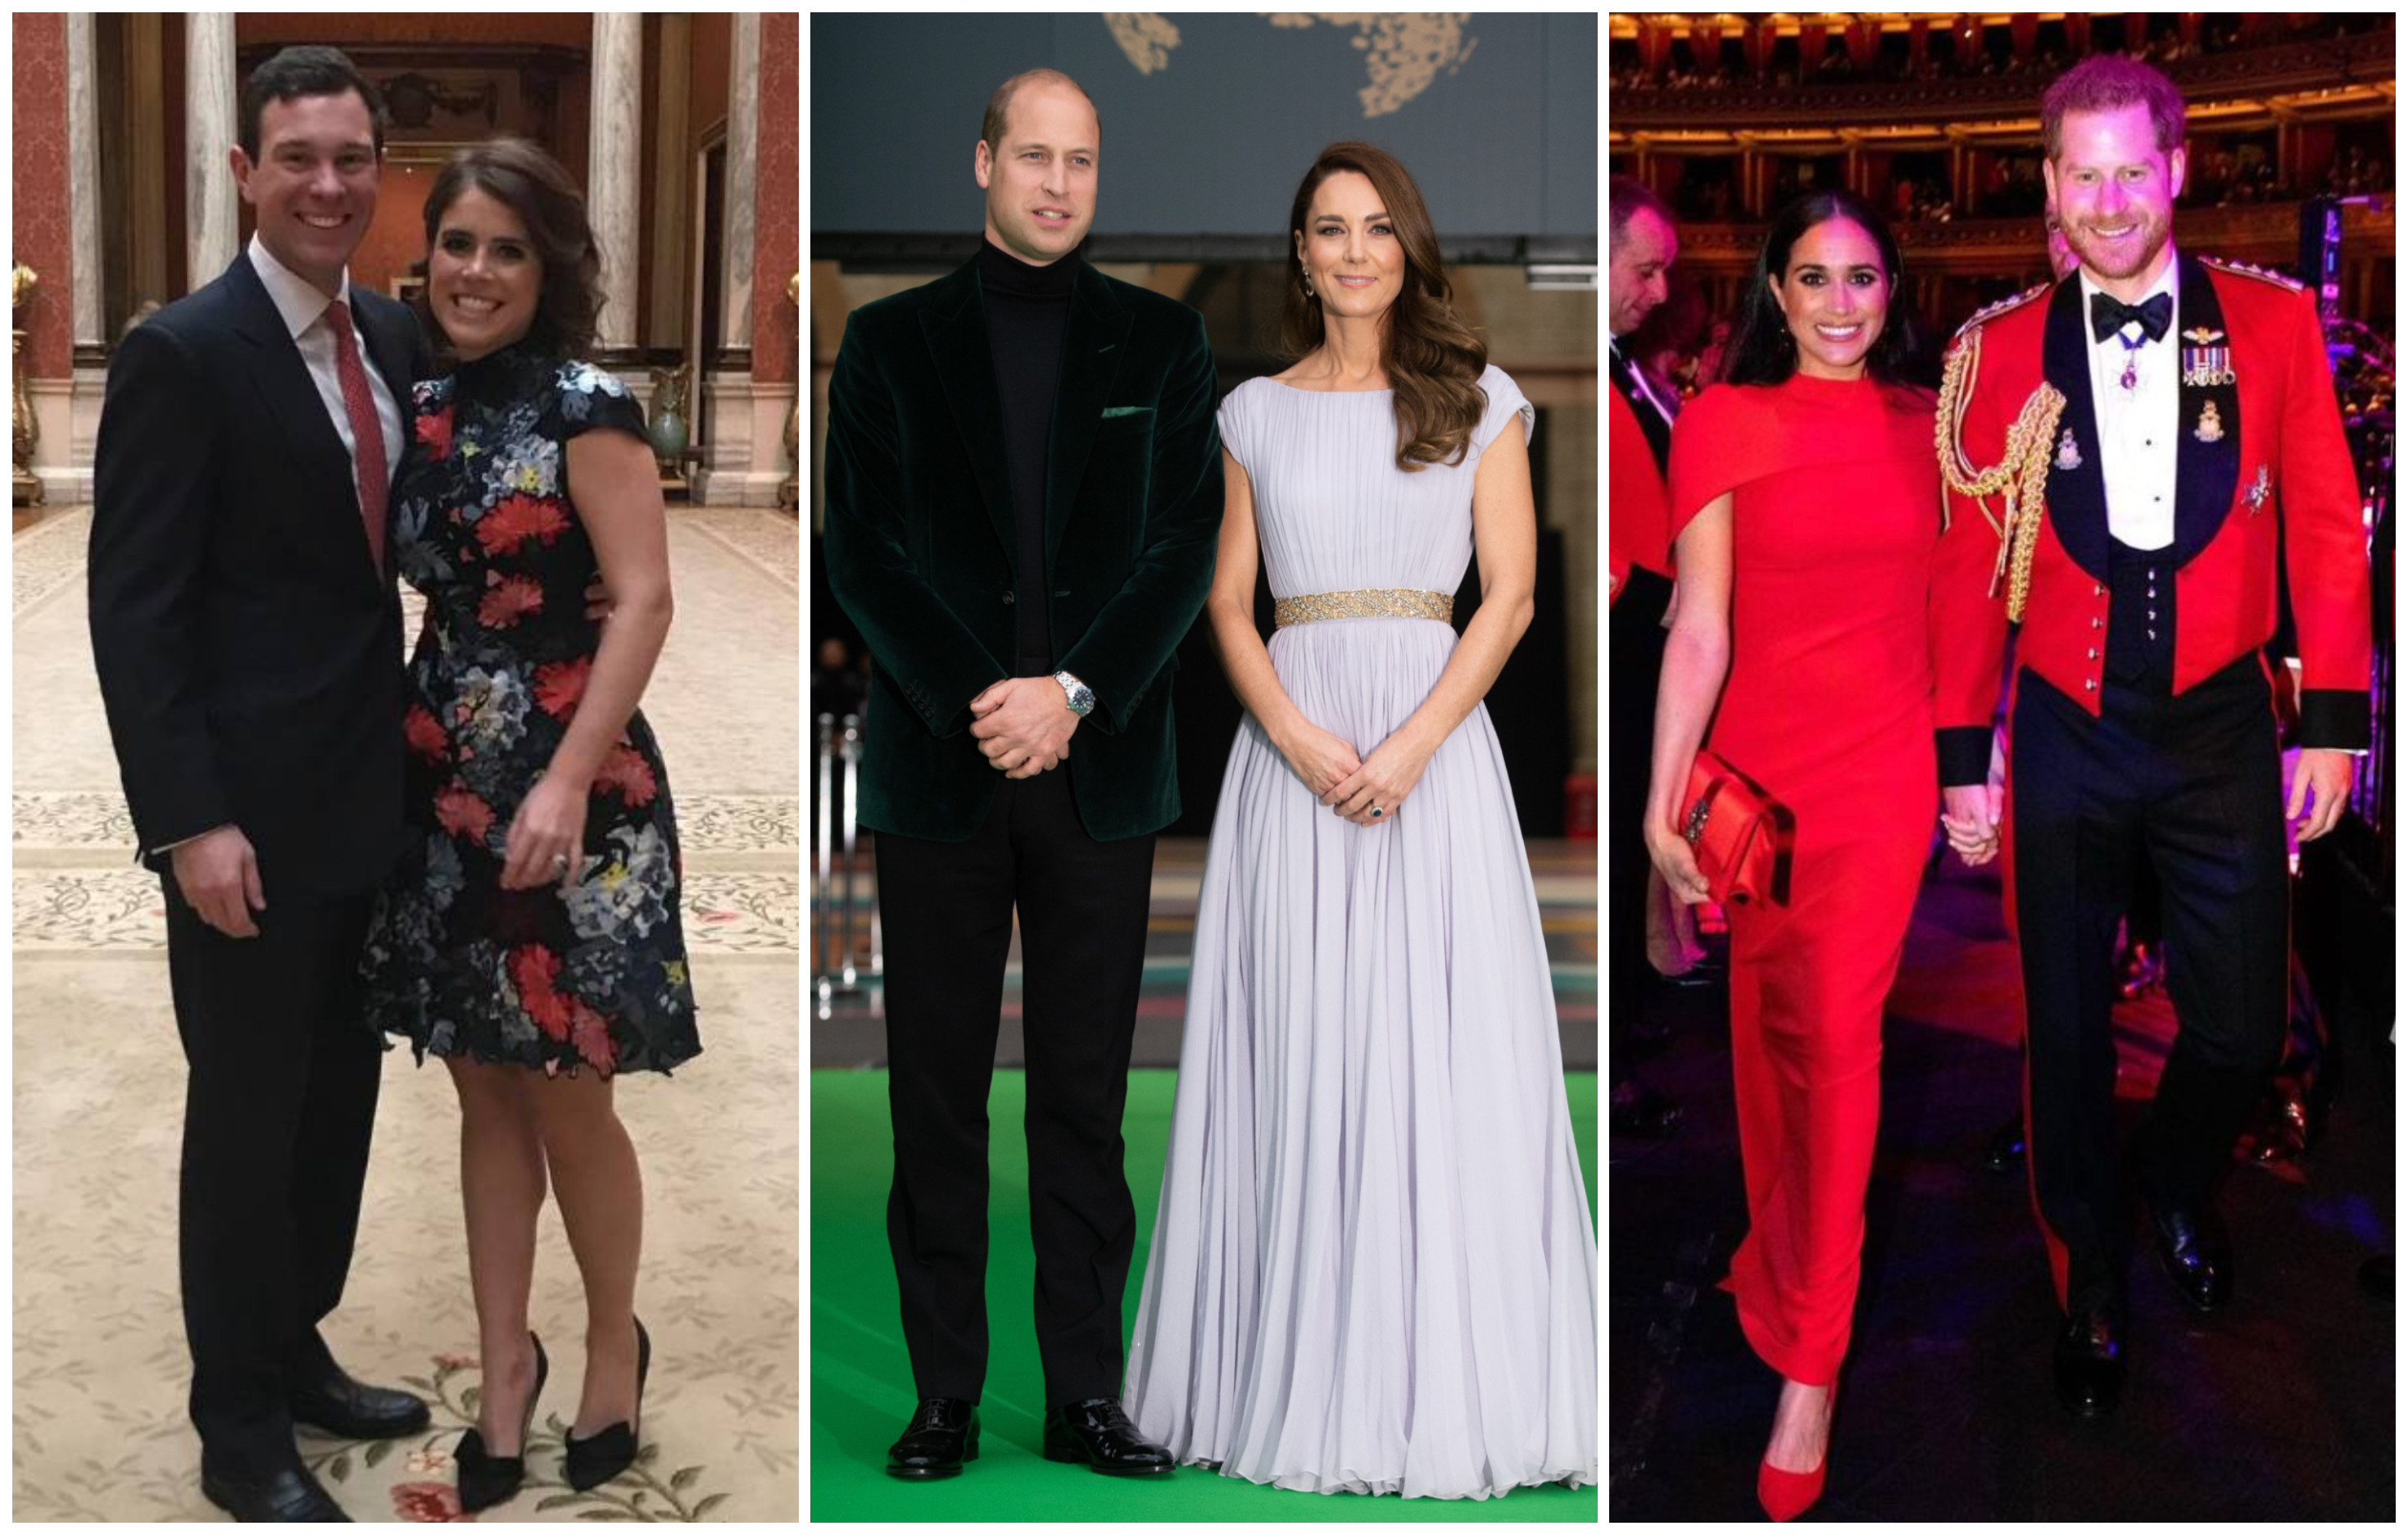 Princess Eugenie and Jack Brooksbank, Prince William and Kate Middleton, and Meghan Markle and Prince Harry. Photos: @princesseugenie, @sussexroyal/Instagram; WireImage